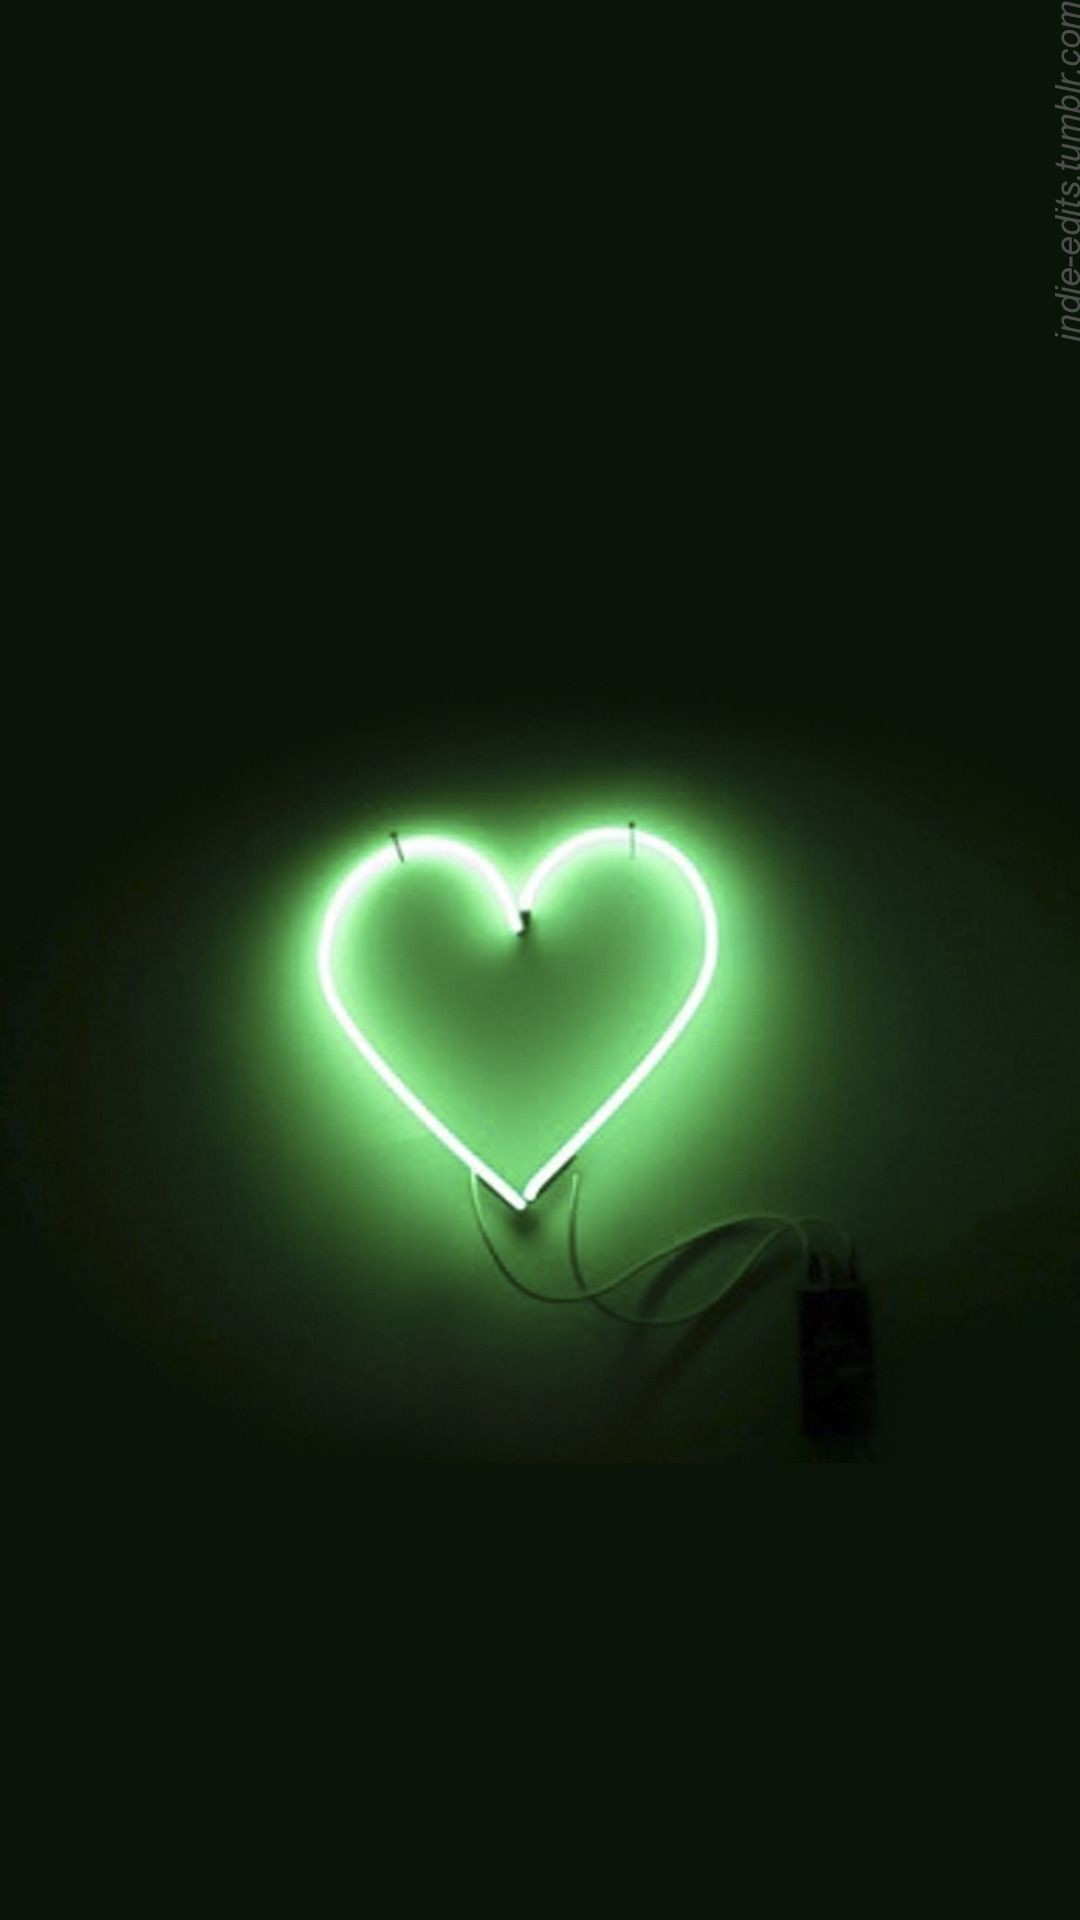 1080x1920 what makes your heart light up.